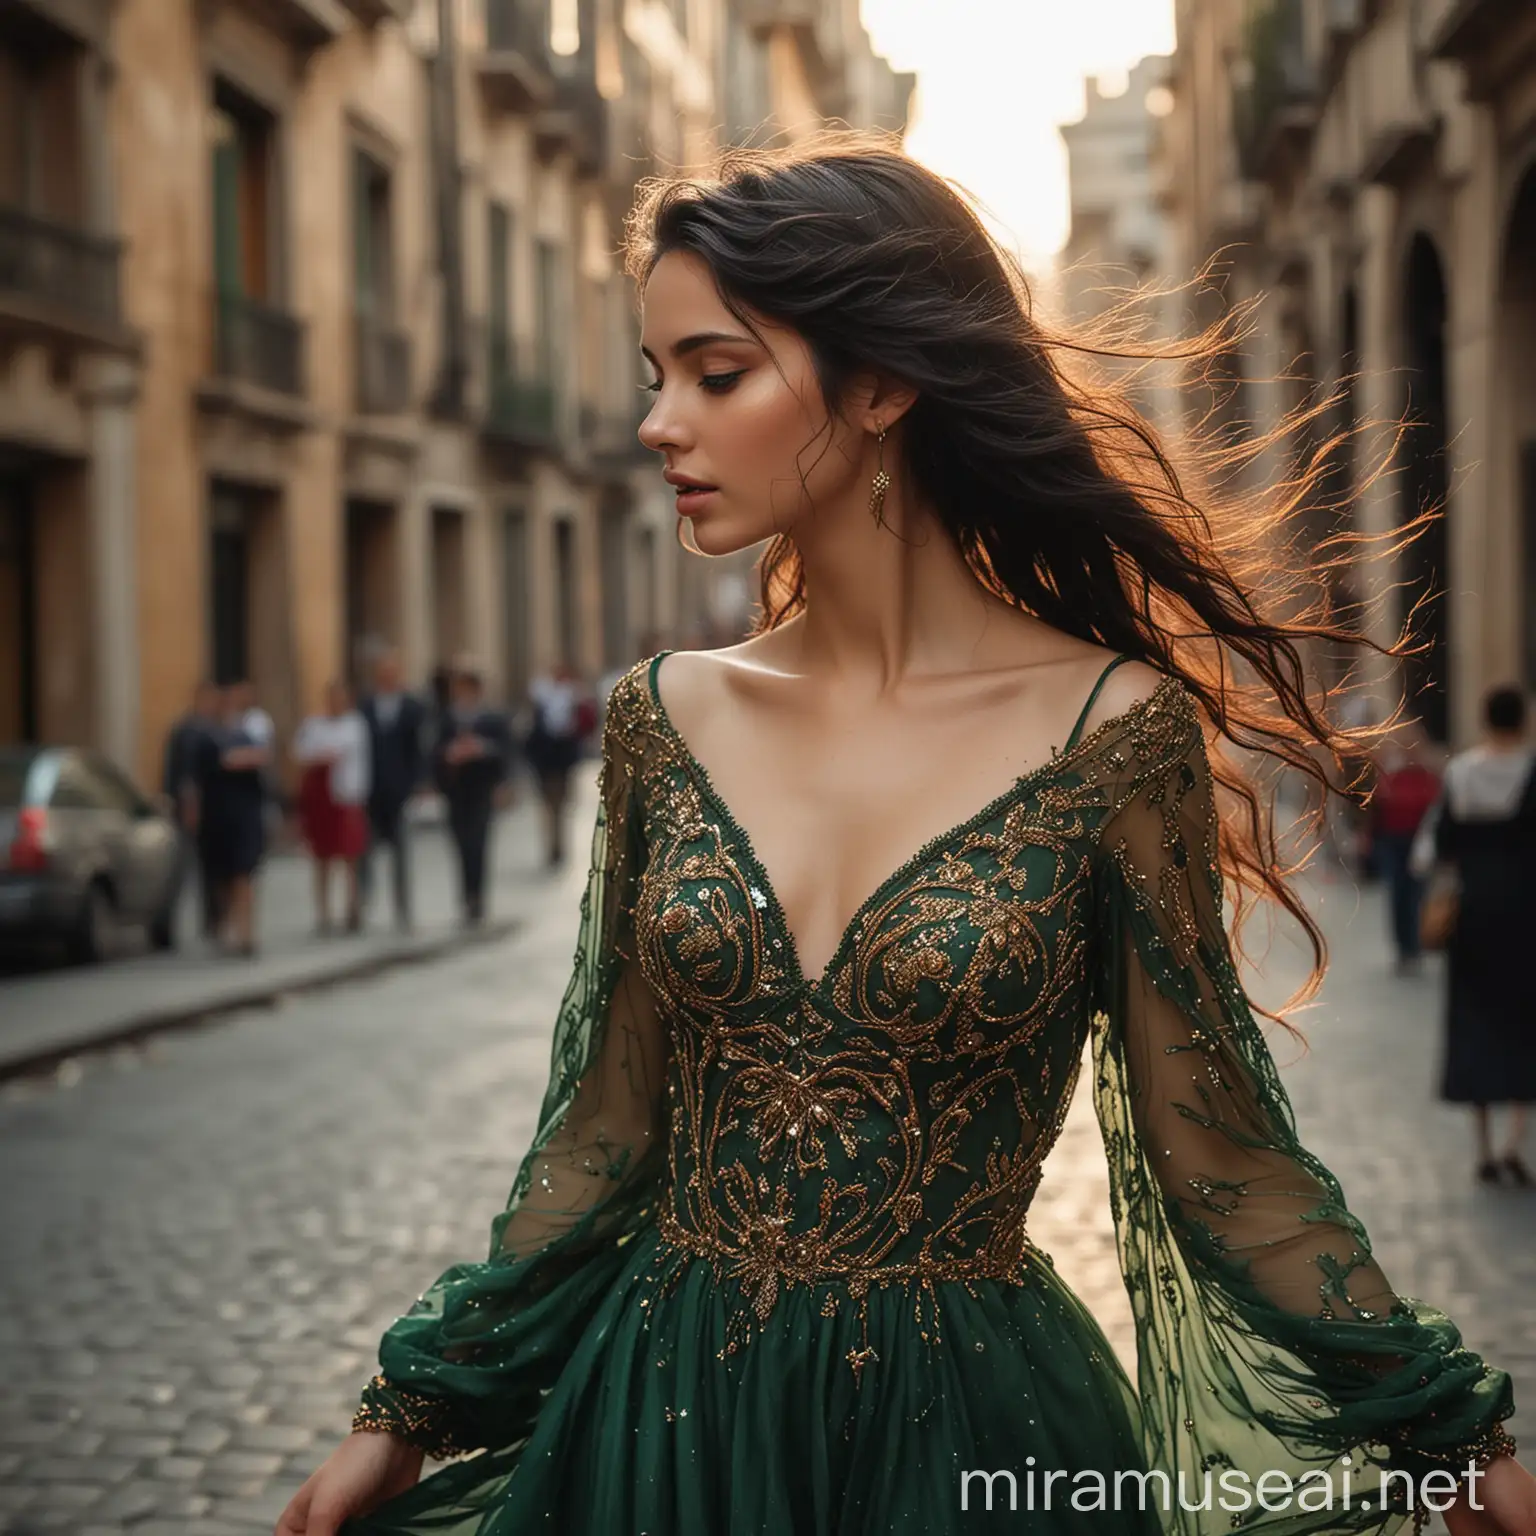 In a bustling city square, amidst the vibrant chaos of life, there she stood—a vision of ethereal beauty. Her olive skin glowed under the golden rays of the setting sun, casting a warm radiance around her. Strands of jet-black hair danced gently in the breeze, framing her delicate features like a work of art. Adorned in a flowing crimson dress that billowed with each graceful step, she exuded an air of confidence and mystery. Her eyes, a mesmerizing shade of emerald green, sparkled with intelligence and kindness, drawing in all who dared to glance her way. She moved with a captivating elegance, effortlessly commanding attention without uttering a single word. In that fleeting moment, she was the embodiment of beauty itself—a timeless muse captured in the chaos of the world.